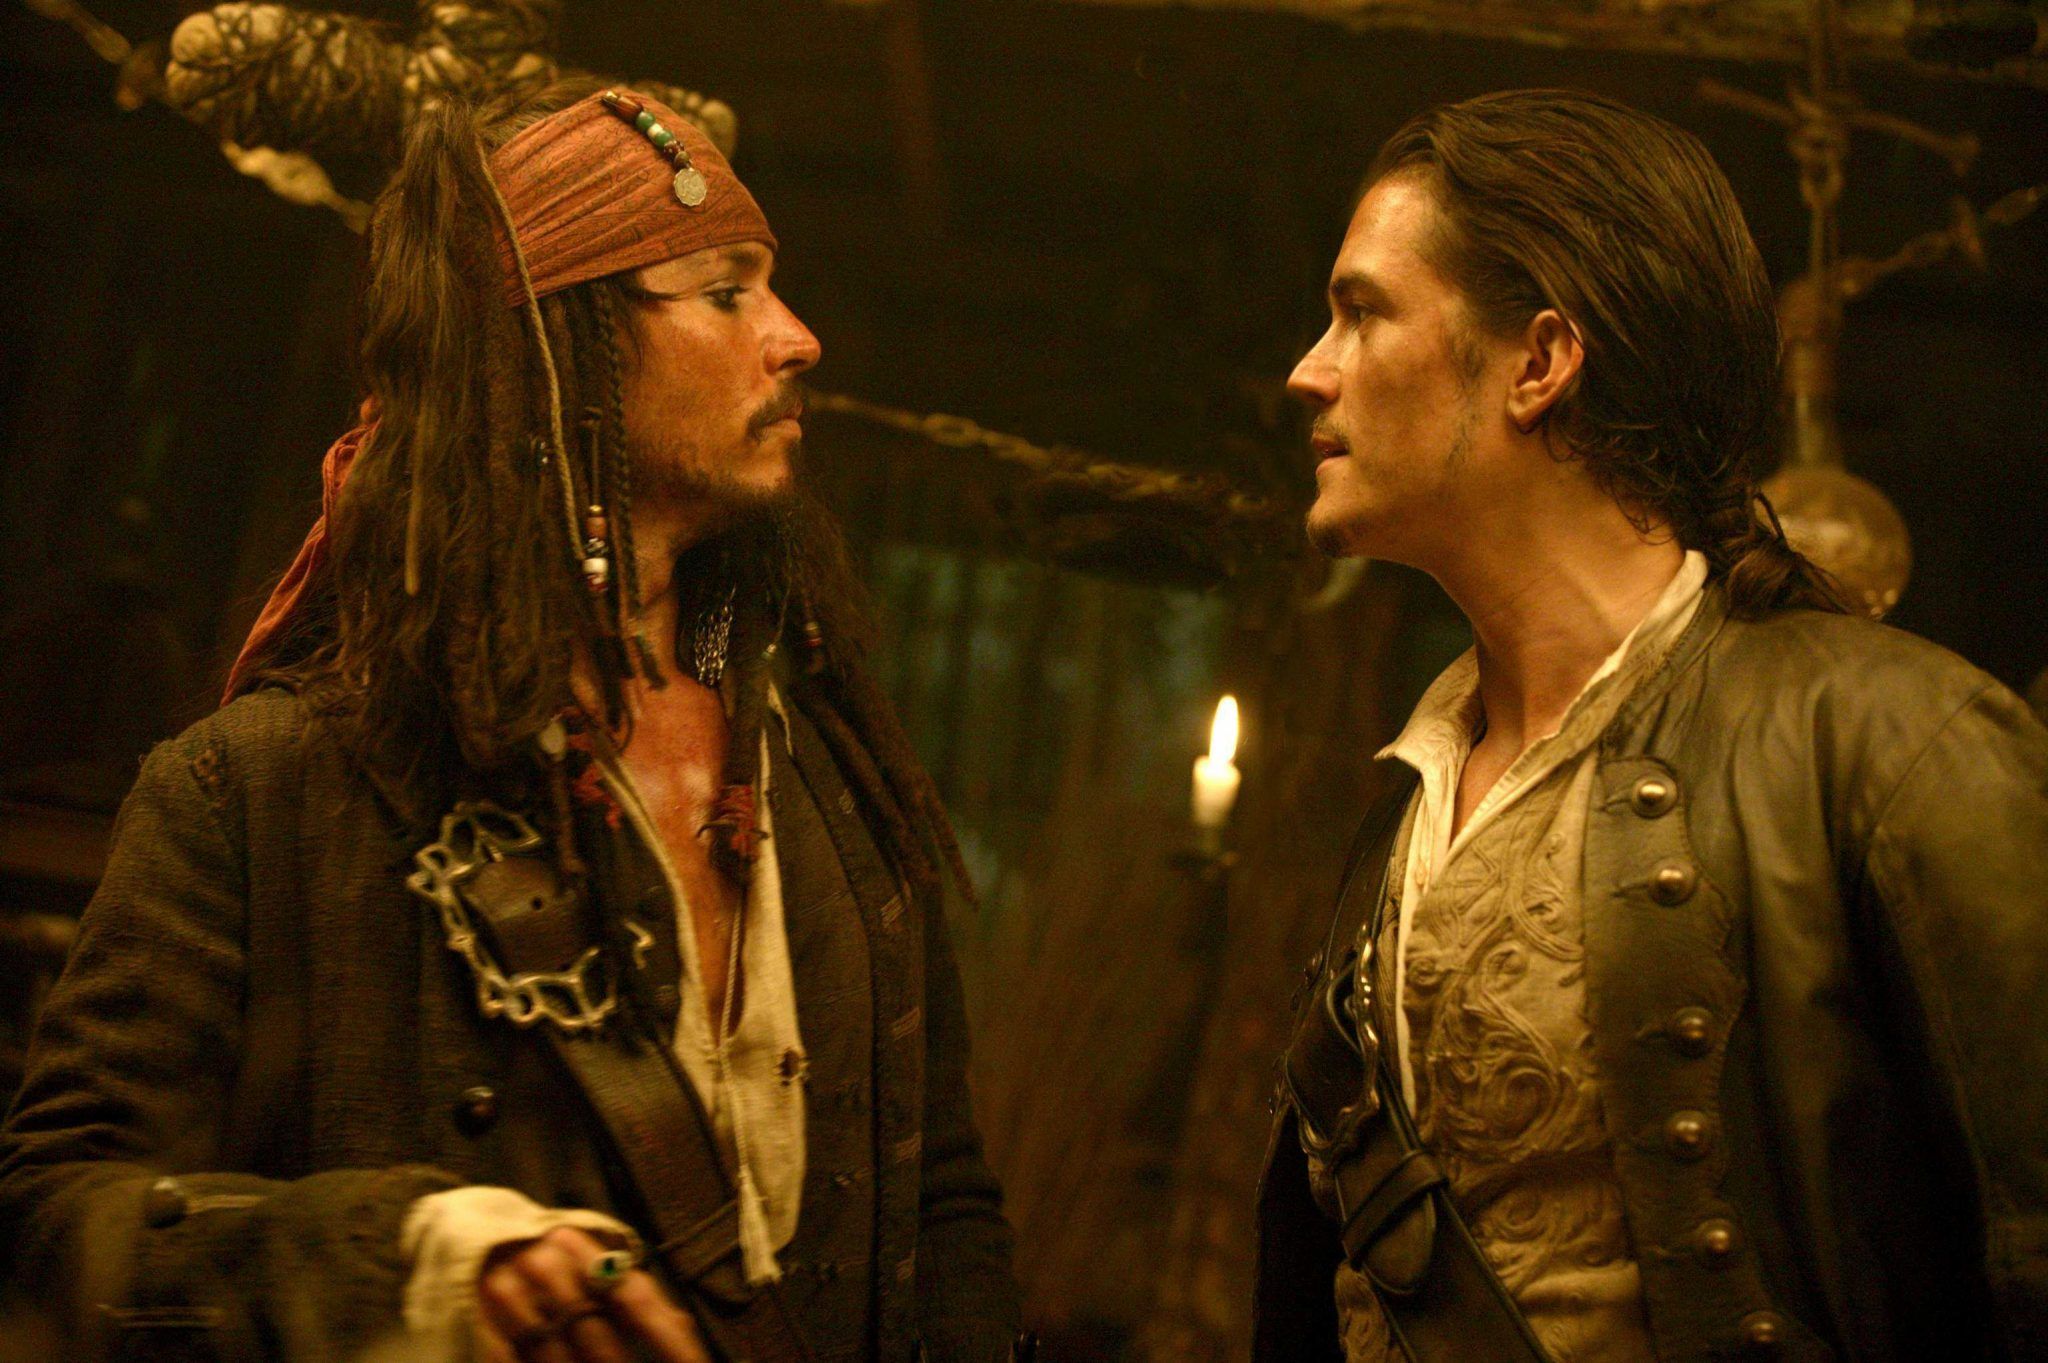 Orlando Bloom to Return for ‘Pirates of the Caribbean 5’? -   Pirates of the Caribbean